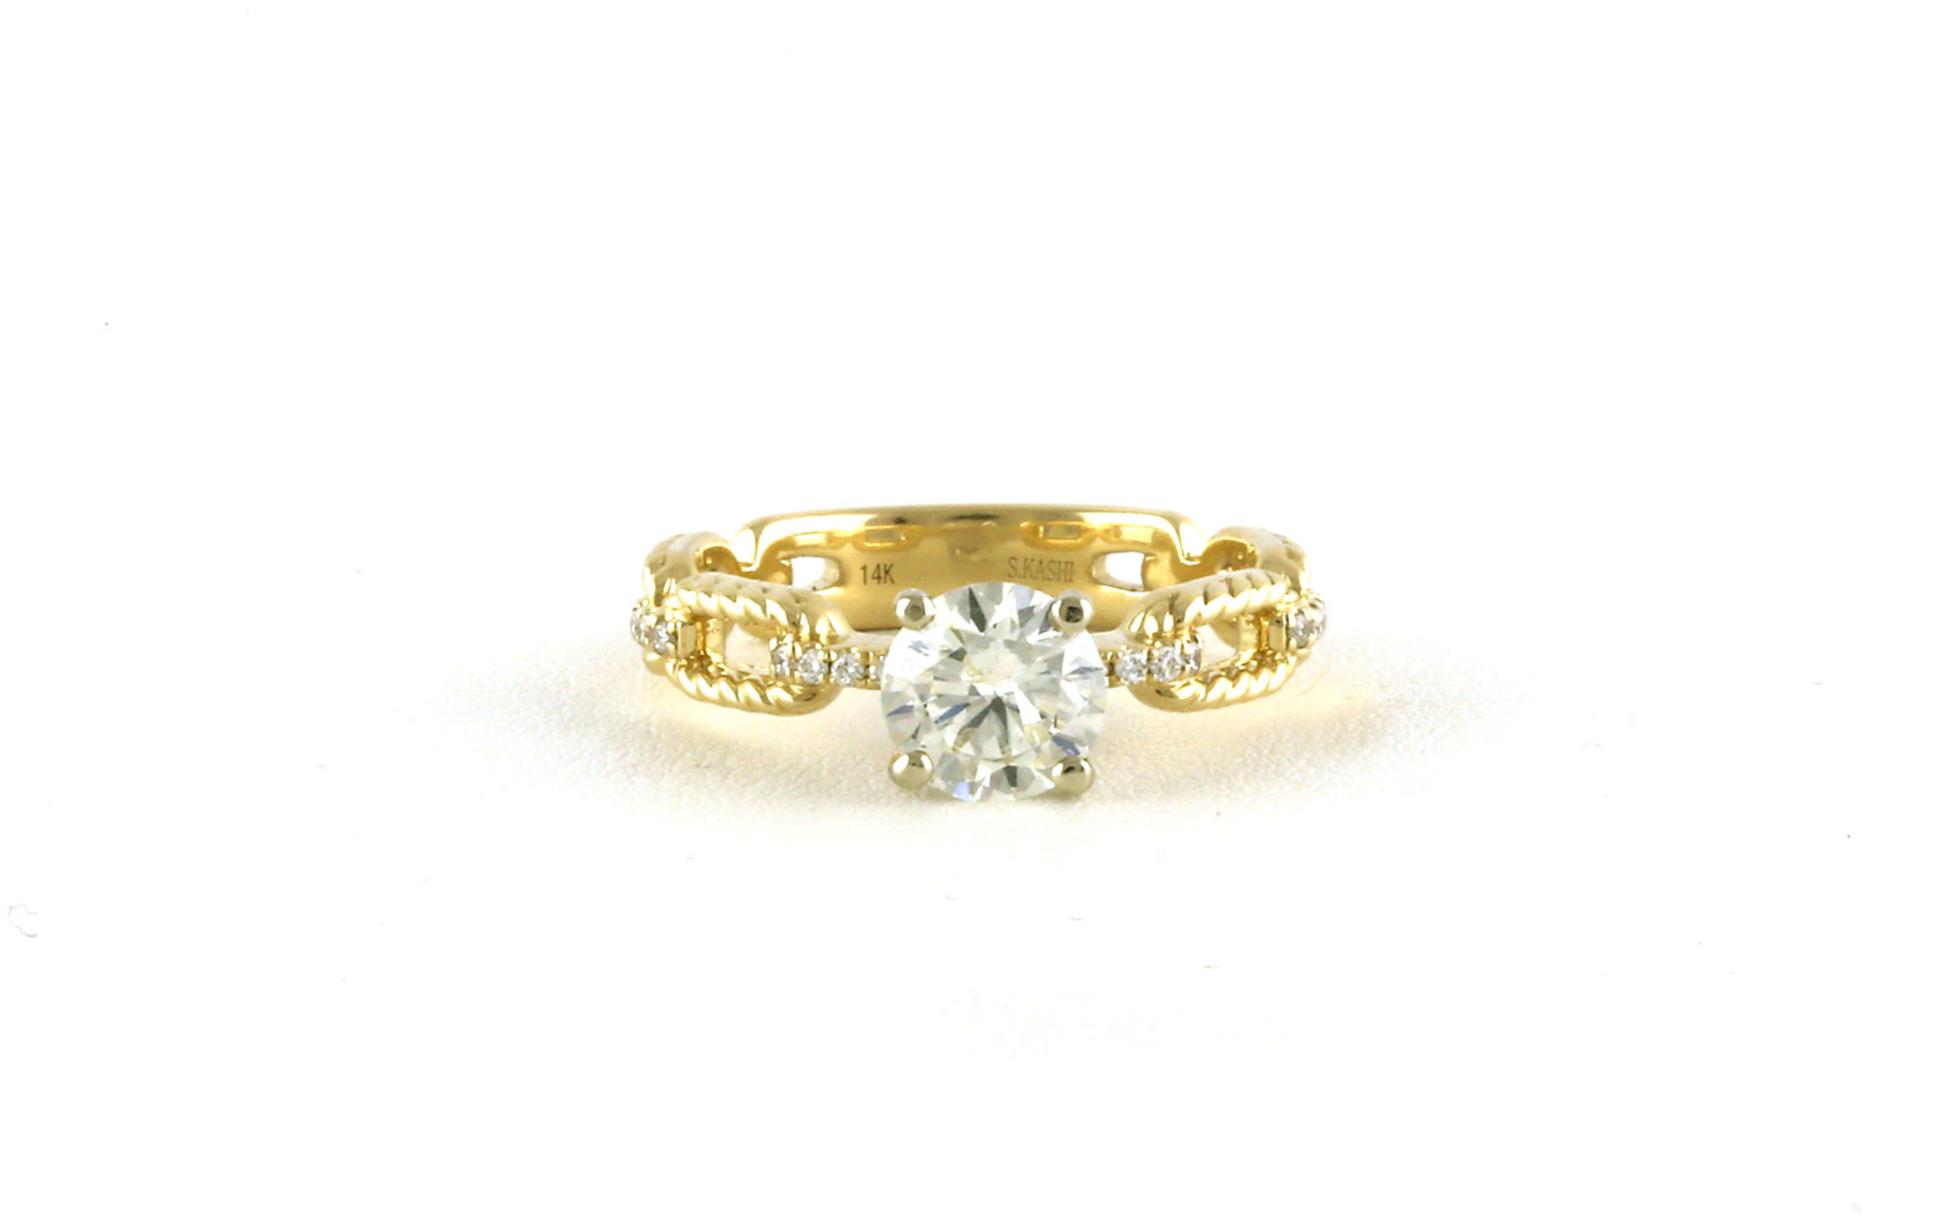 Chain Link Diamond Engagement Ring with Beaded Details in Yellow Gold (1.13cts TWT)